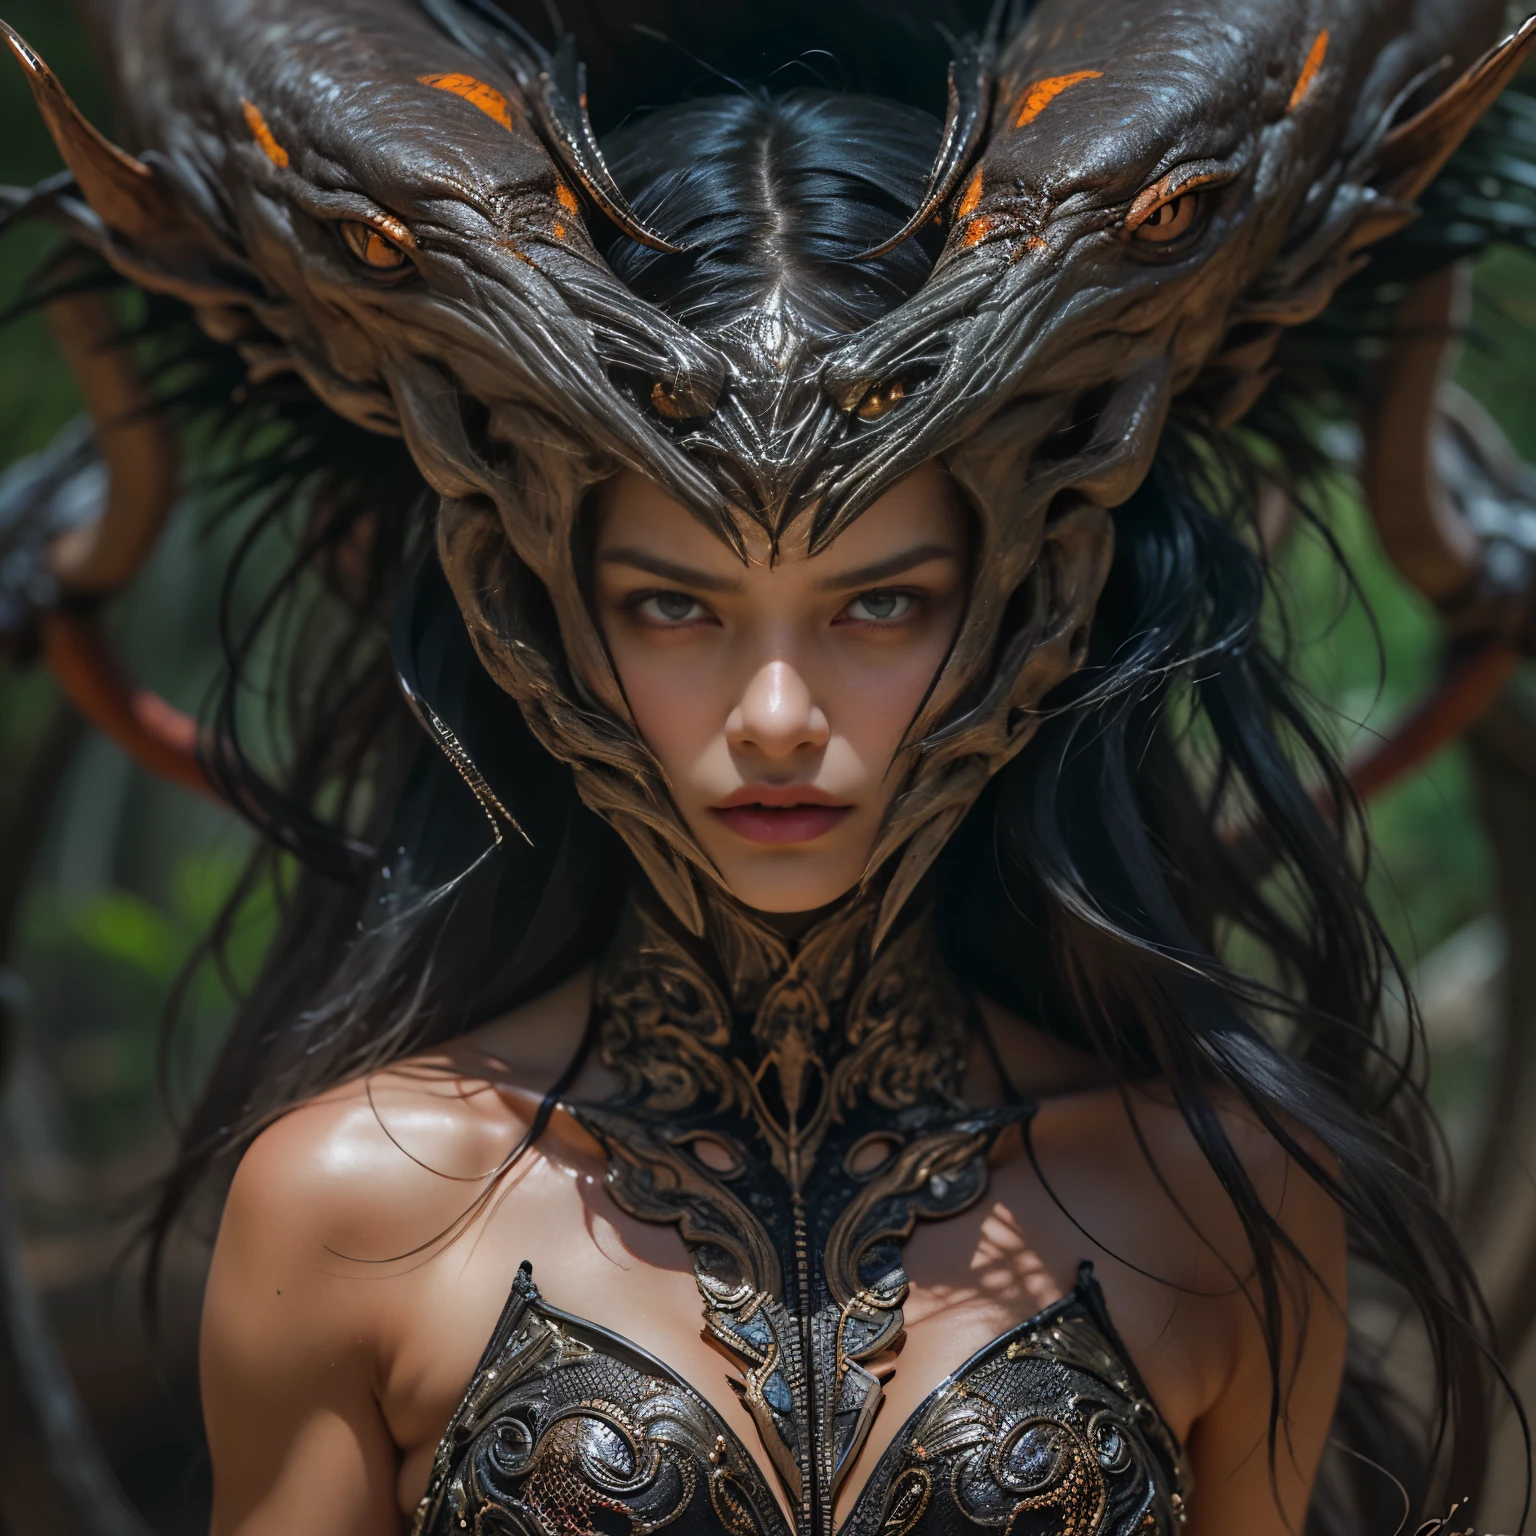 1 female alien, The predator, (extremely beautiful:1.2), (intense gaze:1.4), (predator:1.1), long dark claws, (NSFW:1), nipples, thick eyebrows, (She has shining Amber orange eyes:1.2), the most beautiful face in the universe, jet black hair, symmetrical beautiful eyes, hyper detailed eyes,

A woman predator with an extremely beautiful face, her intense gaze fixed on her prey, a primal force that could not be denied.

(beautiful lean body:1.5), (muscular build:1.2), (prowling:1.3), (sleek movements:1.4)

Her beautiful body, muscular and toned, moved with sleek grace as she prowled, ready to strike at a moment's notice. The predator within her was always on,                                                                          
                                                                                                                                                               
 cinematic drawing of characters, ultra high quality model, cinematic quality, detail up, (Intricate details:1.2), High resolution, High Definition, drawing faithfully, Official art, Unity 8K wall , 8K Portrait, Best Quality, Very High resolution, ultra detailed artistic photography,